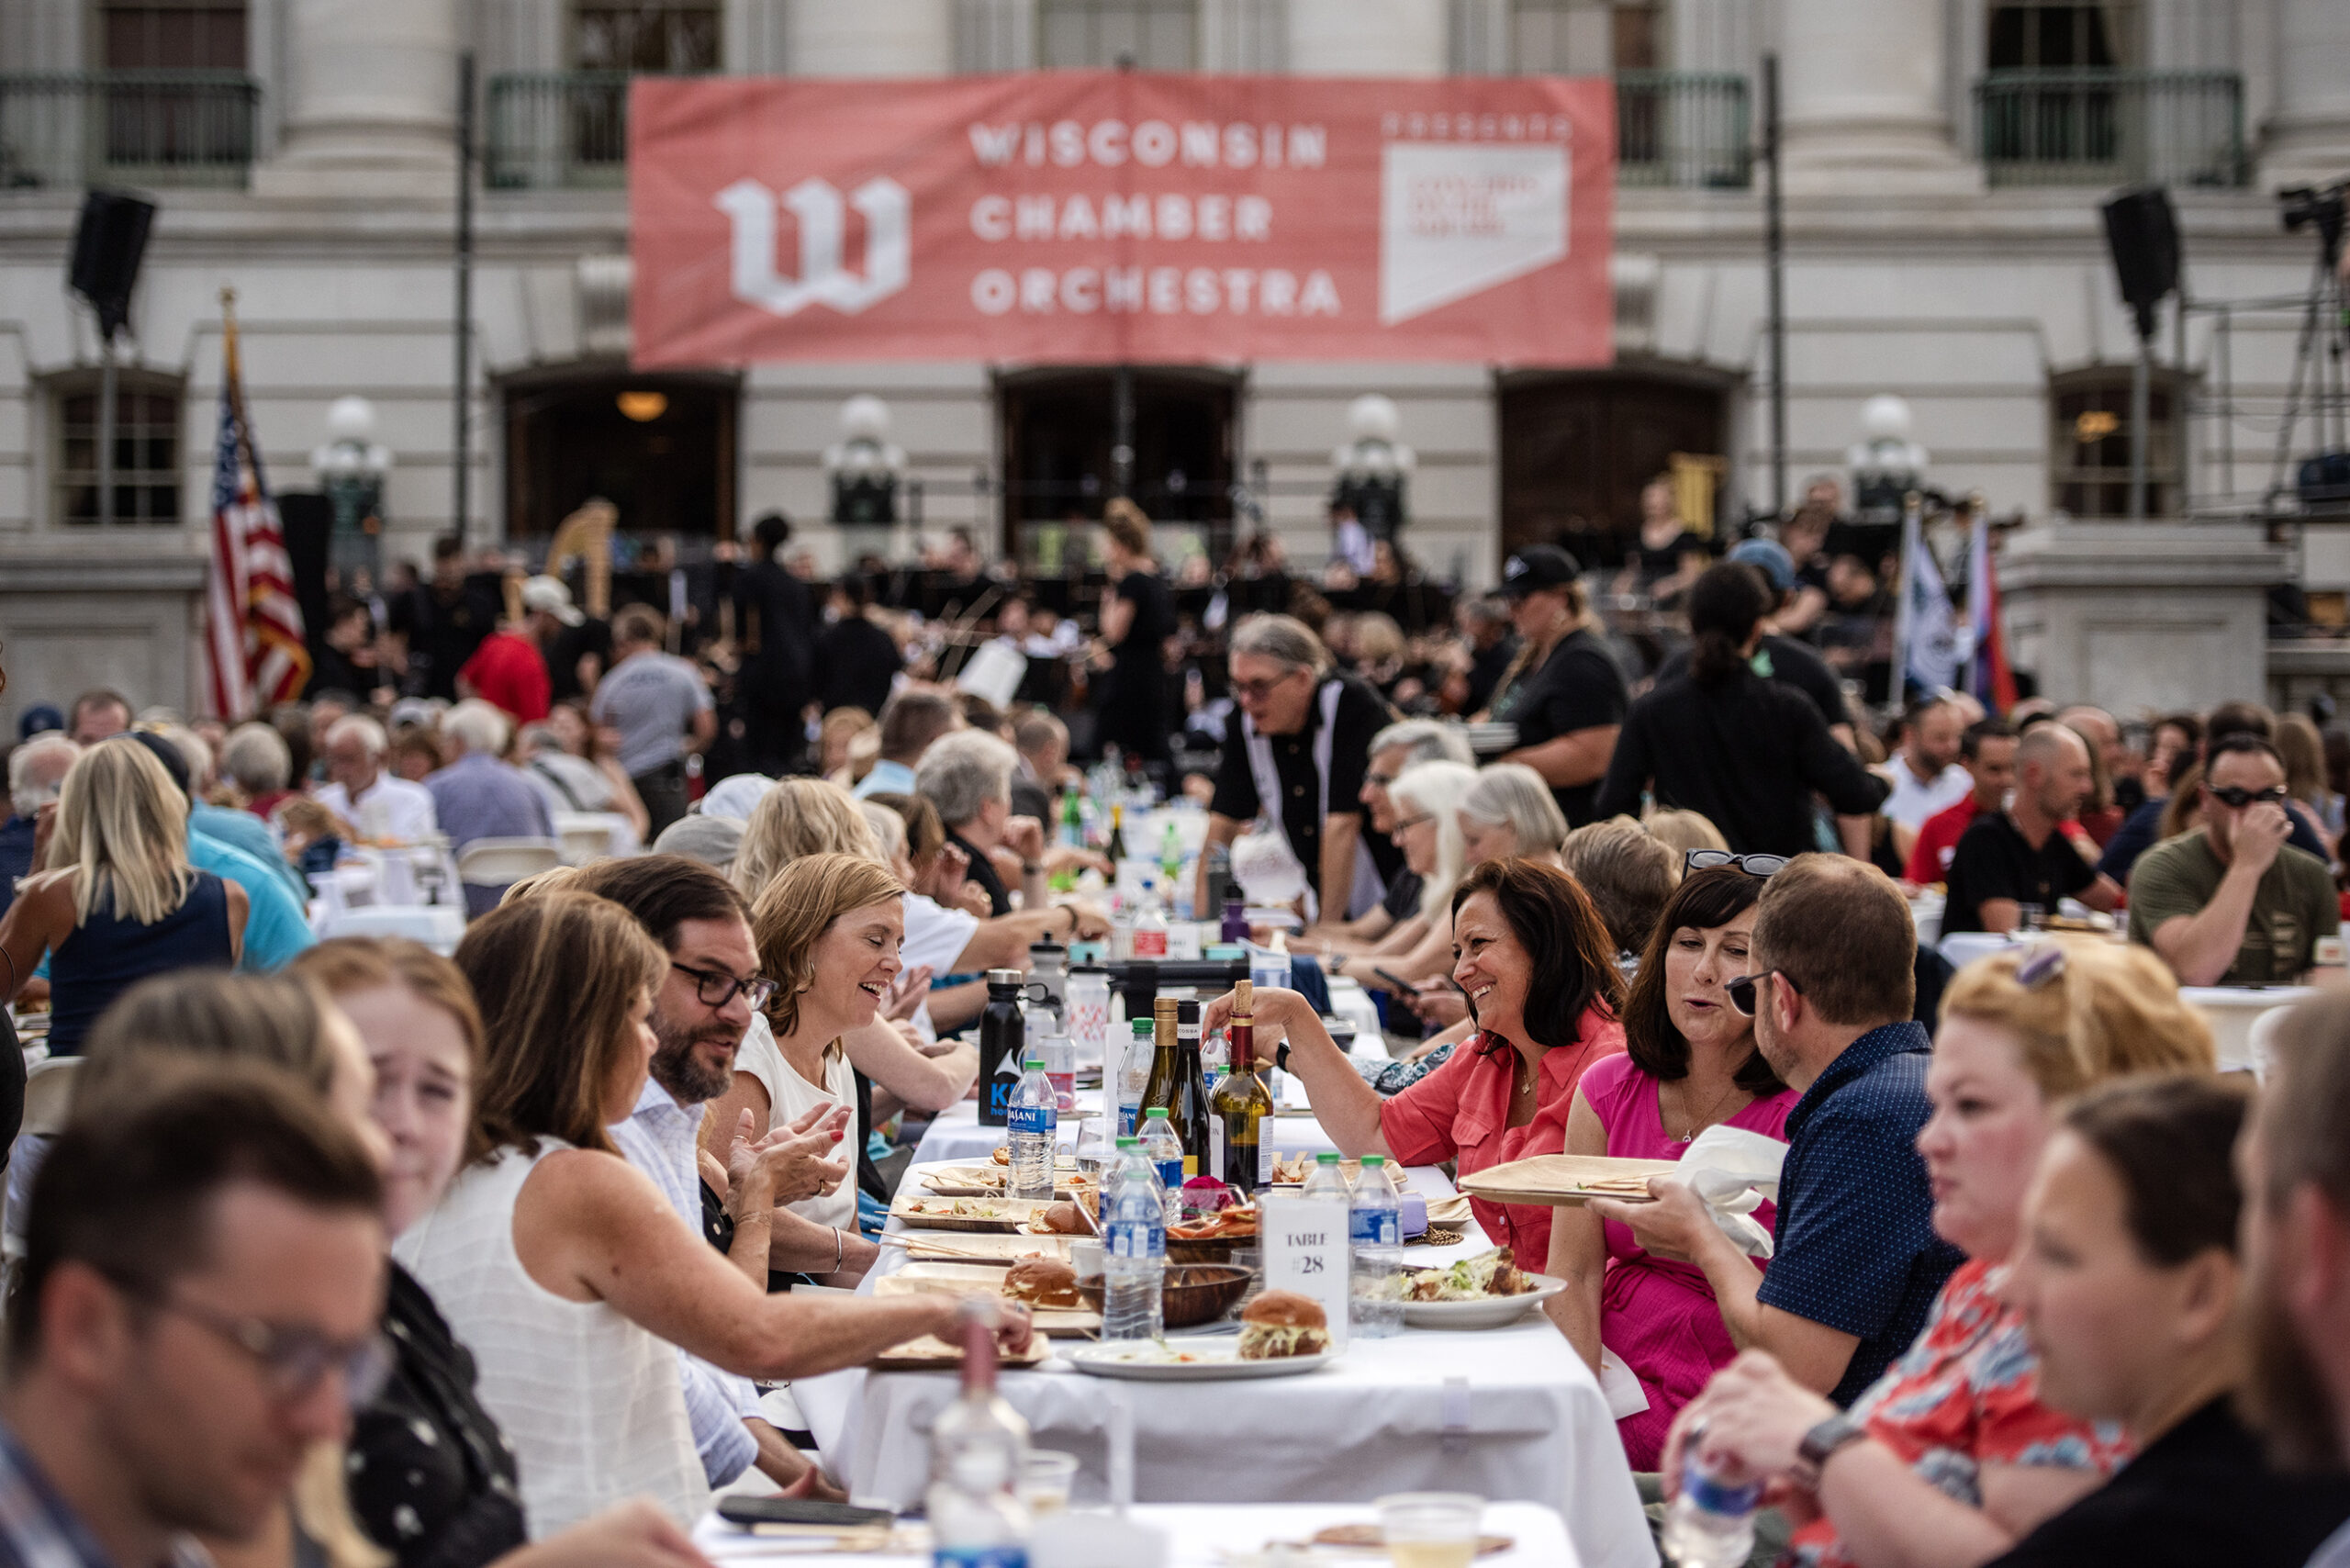 Attendees enjoy food and wine as the Wisconsin Chamber Orchestra plays Wednesday, July 19, 2023, at the Wisconsin State Capitol in Madison, Wis. (Angela Major/WPR)